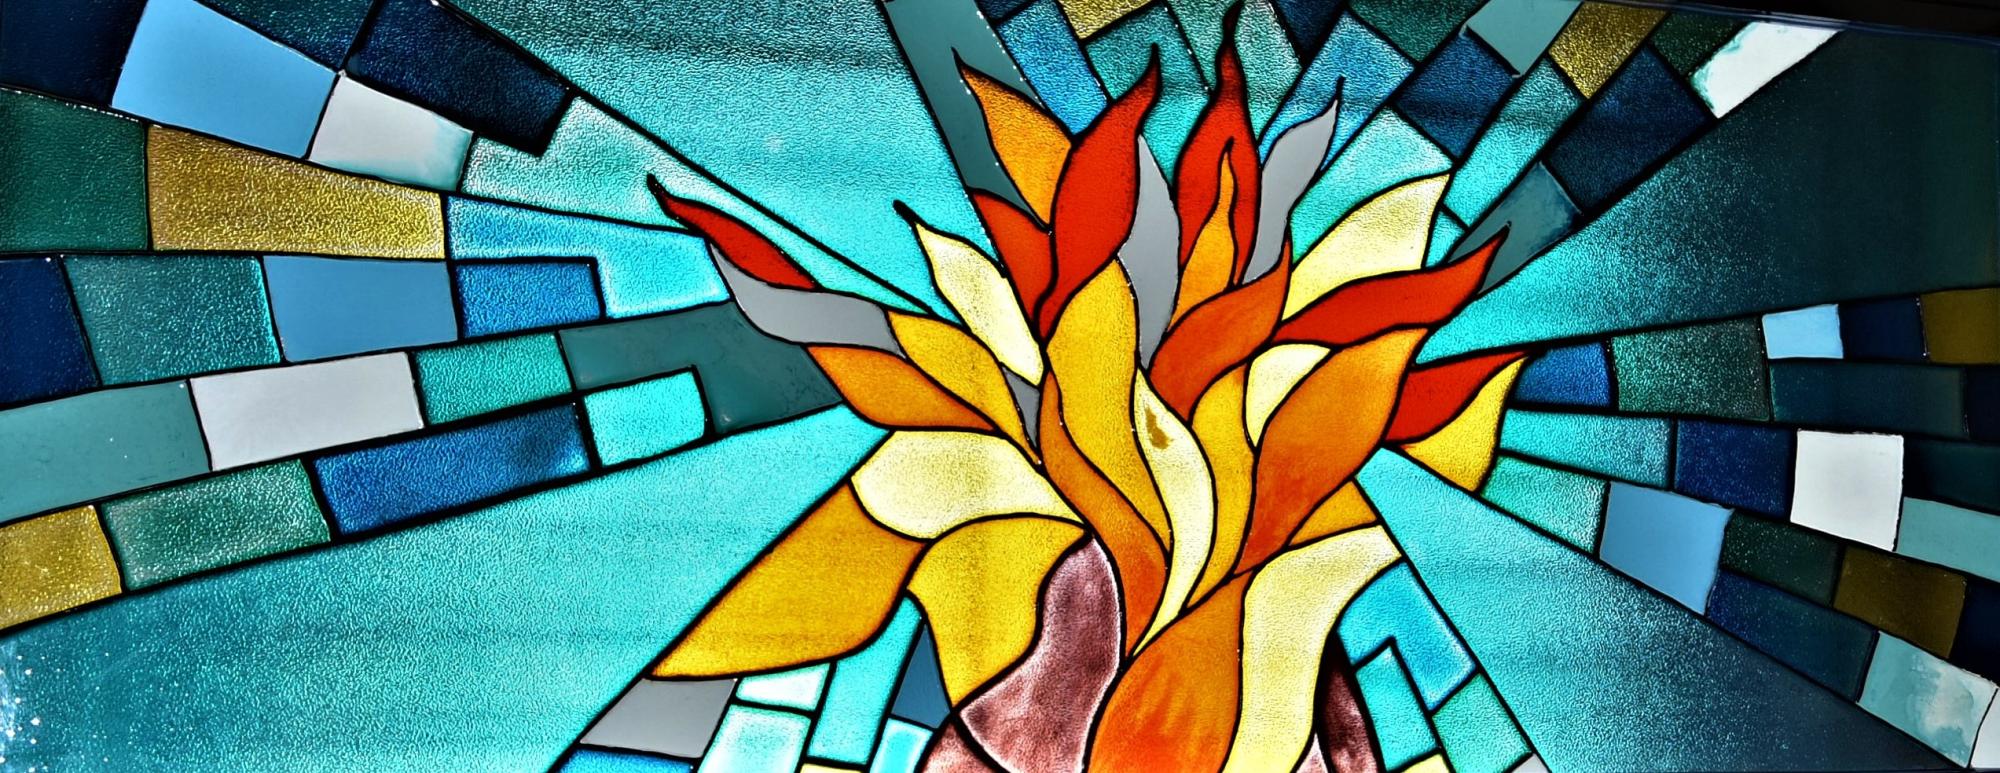 A stained glass window of fire at the Eco-Health and Healing Centre, Pune, India